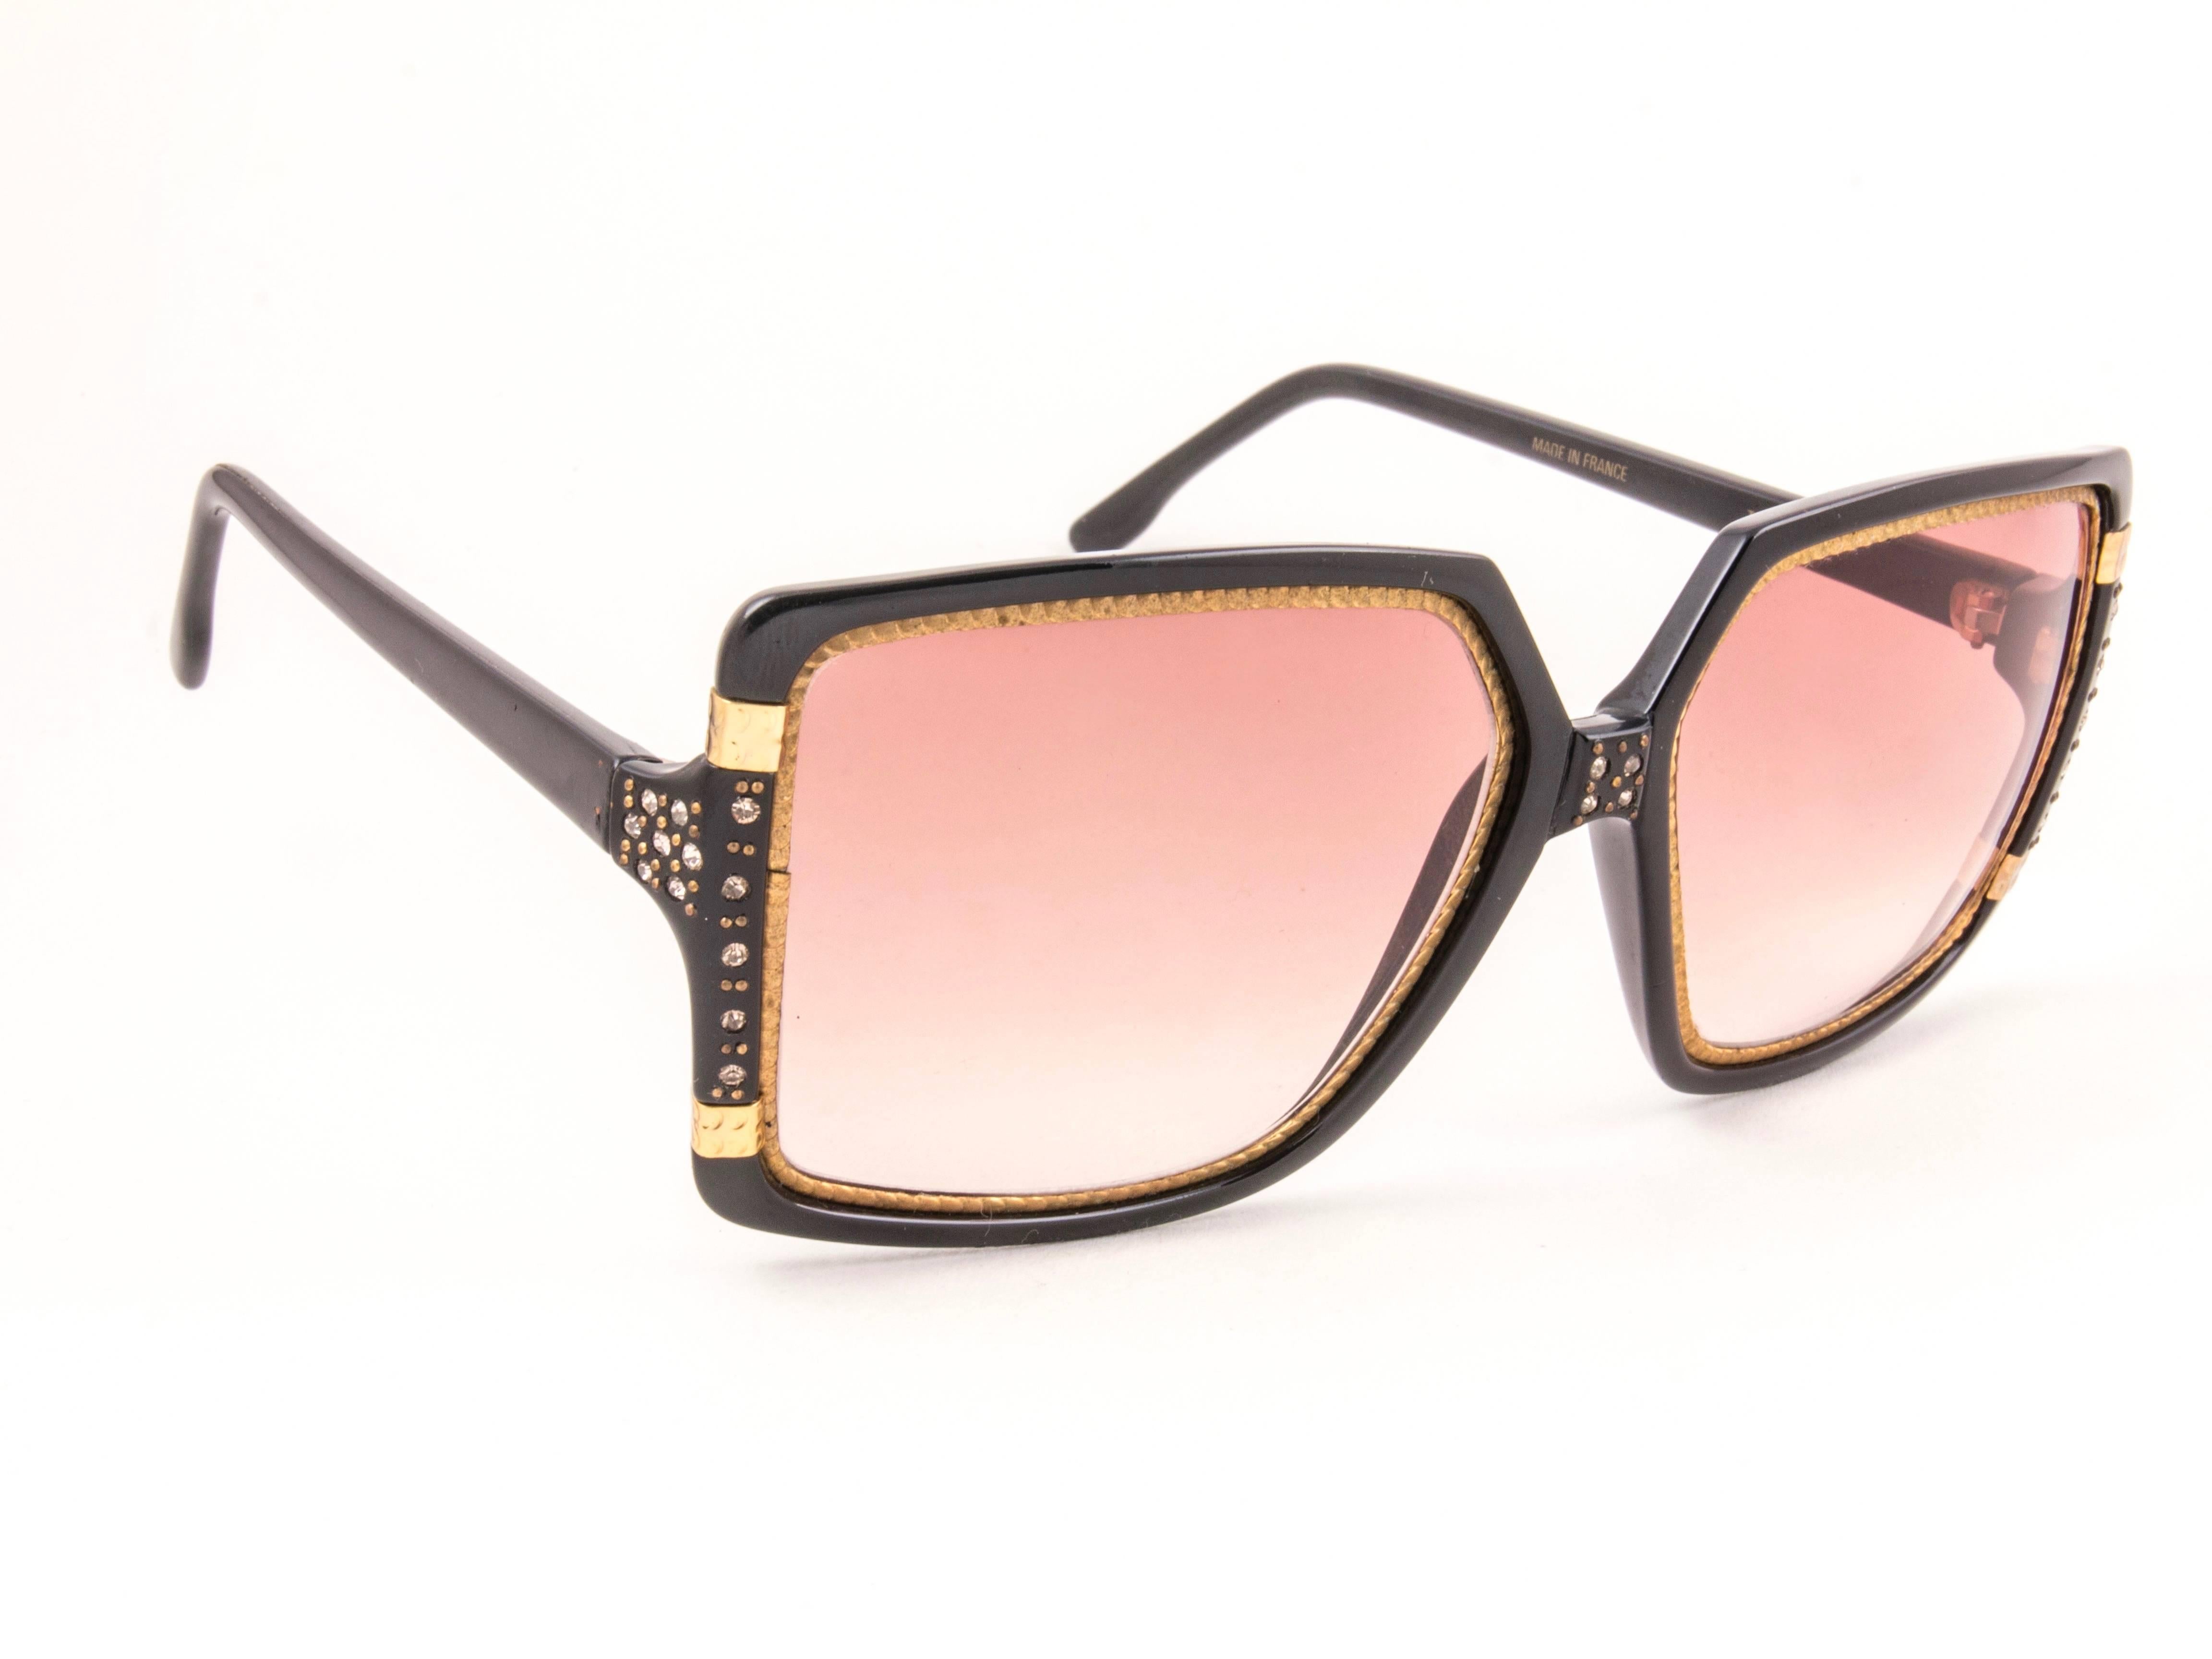 New Vintage Ted Lapidus TL Strass accents over a black & gold frame with spotless rose gradient lenses.  
Made in Paris.  
Produced and design in 1970's.  
New, never worn or displayed.